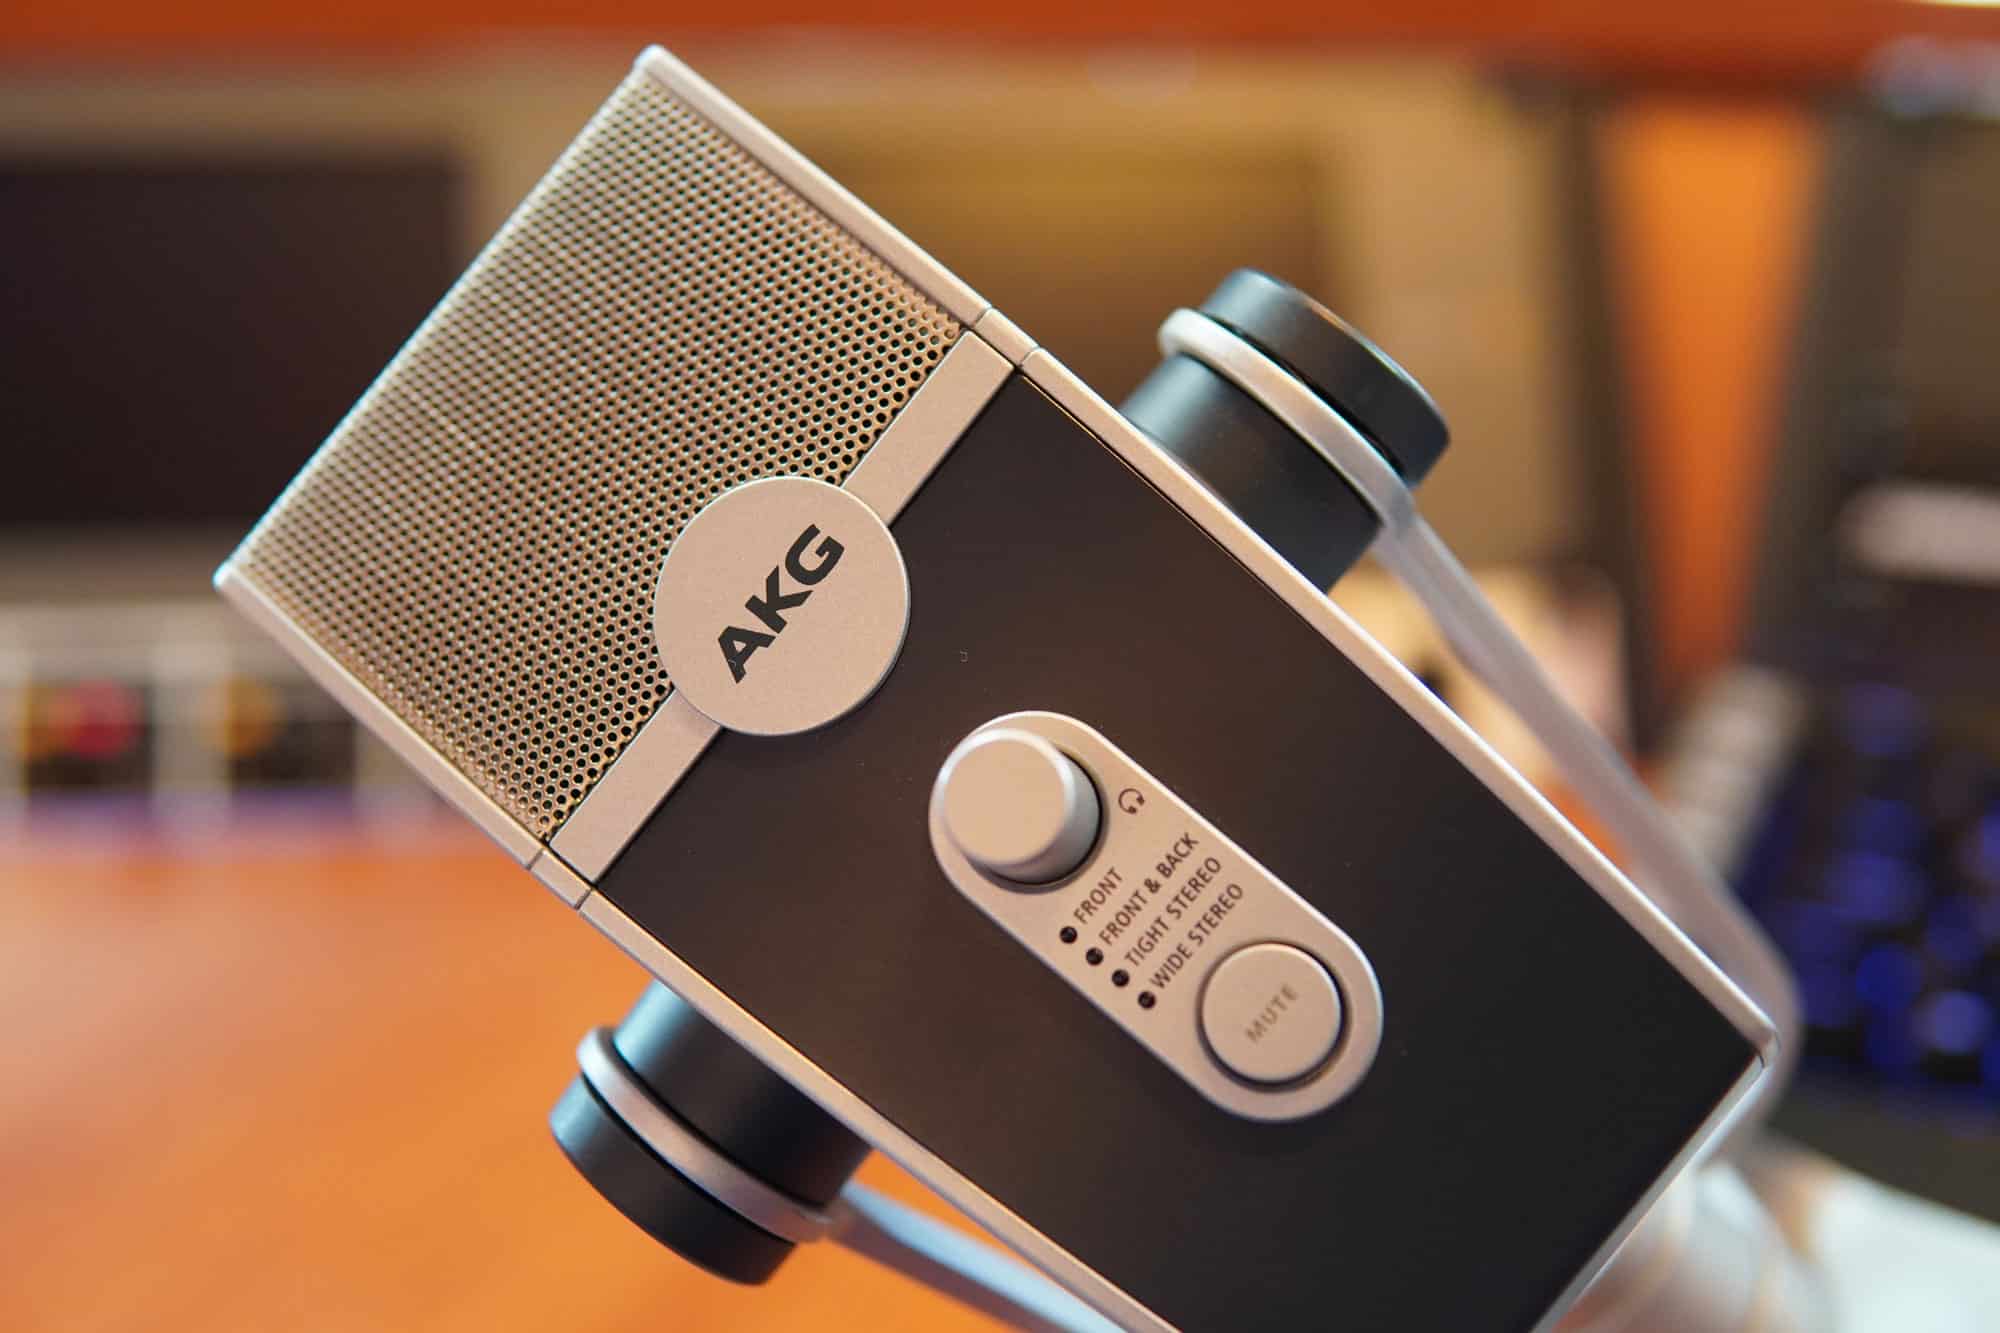 The Best USB Microphones Compared General usb microphones Music Radio Creative